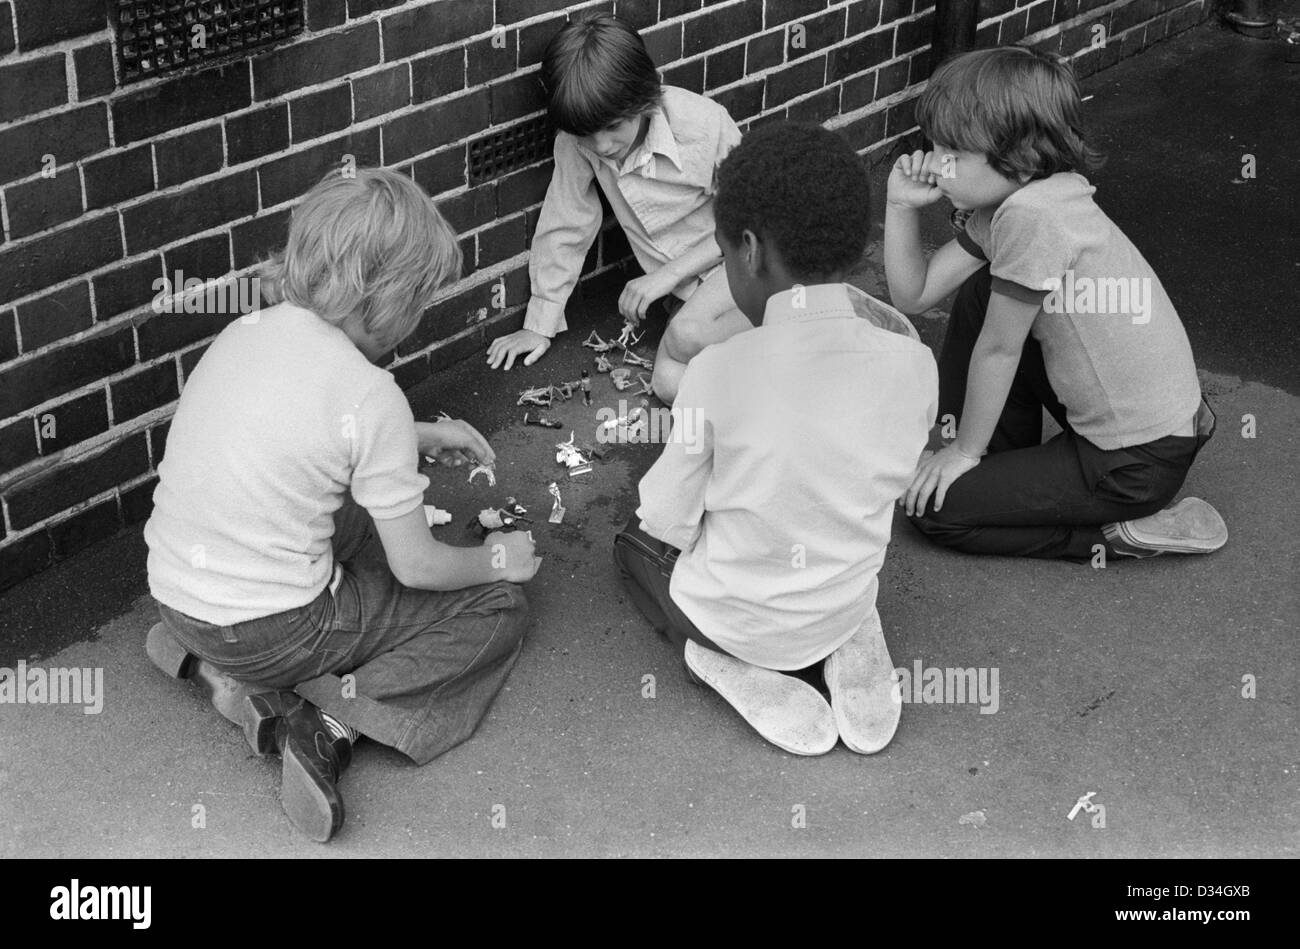 Playground games. South London junior school 1970s England. Multi ethnic group boys playing with toy soldiers.1975 UK HOMER SYKES Stock Photo